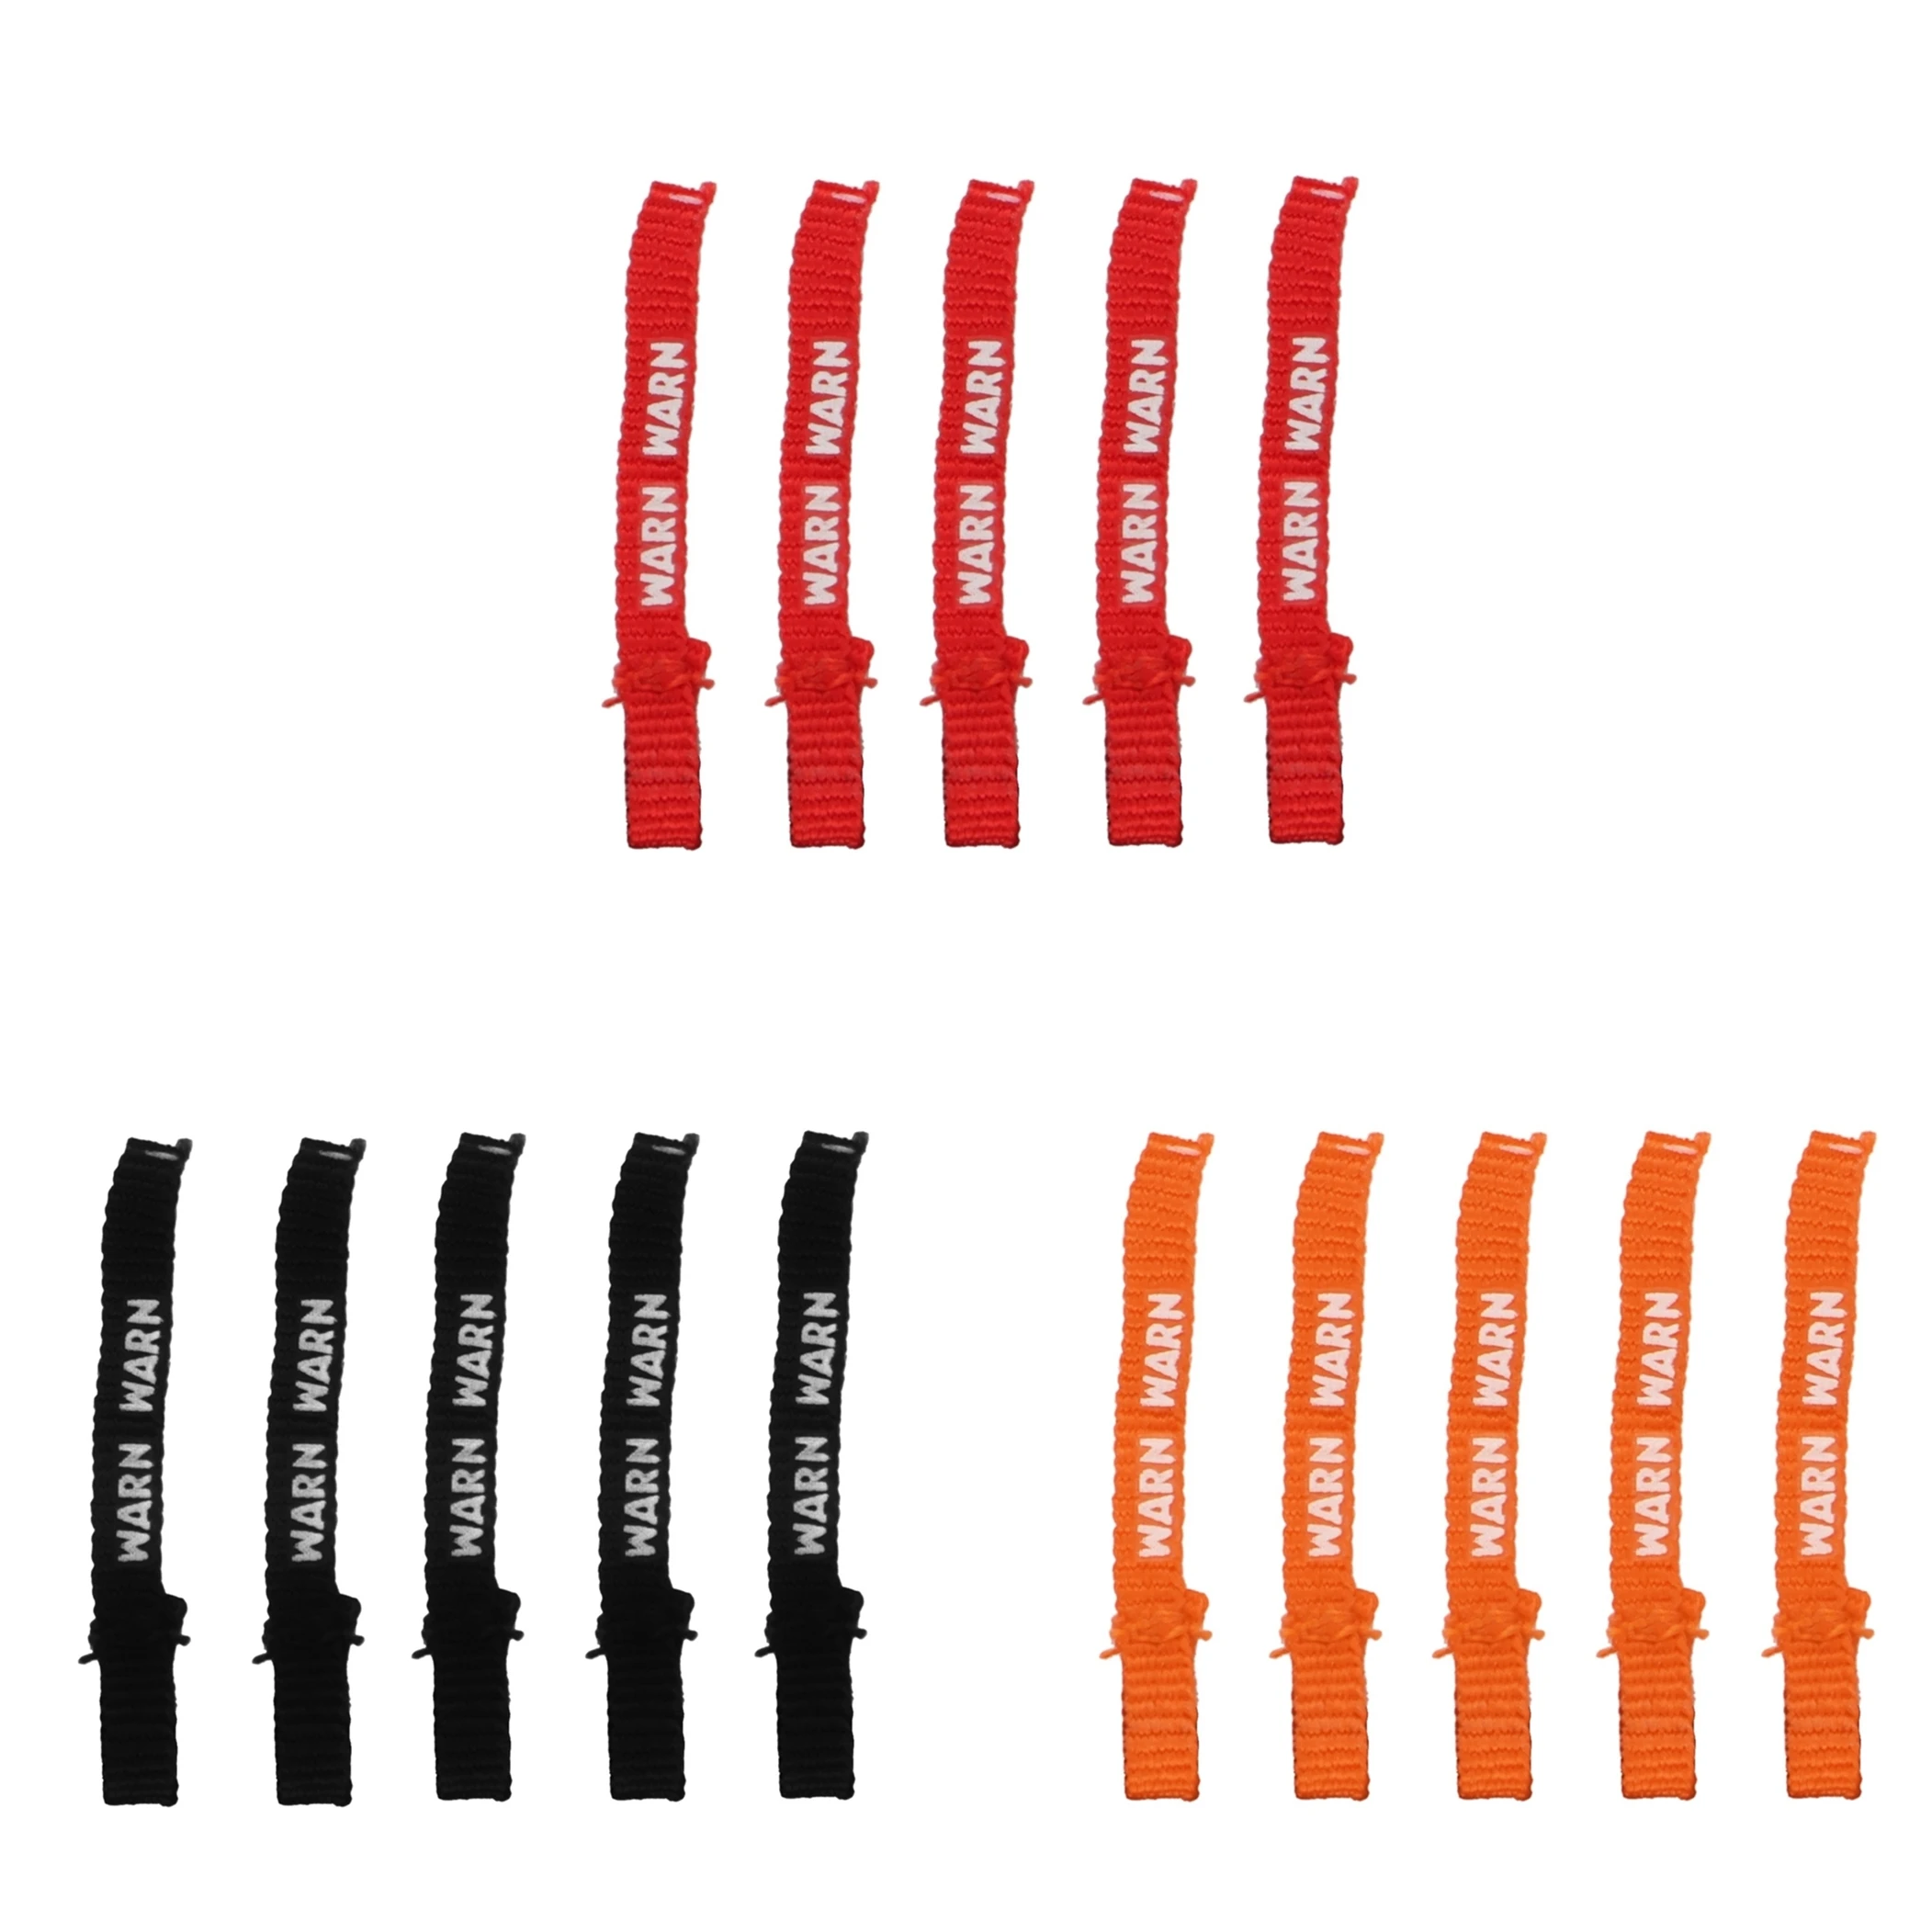 5pcs RC Car Winch Hook Pull Strap Winch Pull Tags for 1/10 RC Crawler Car Axial SCX10 Traxxas TRX4 RC4WD Parts